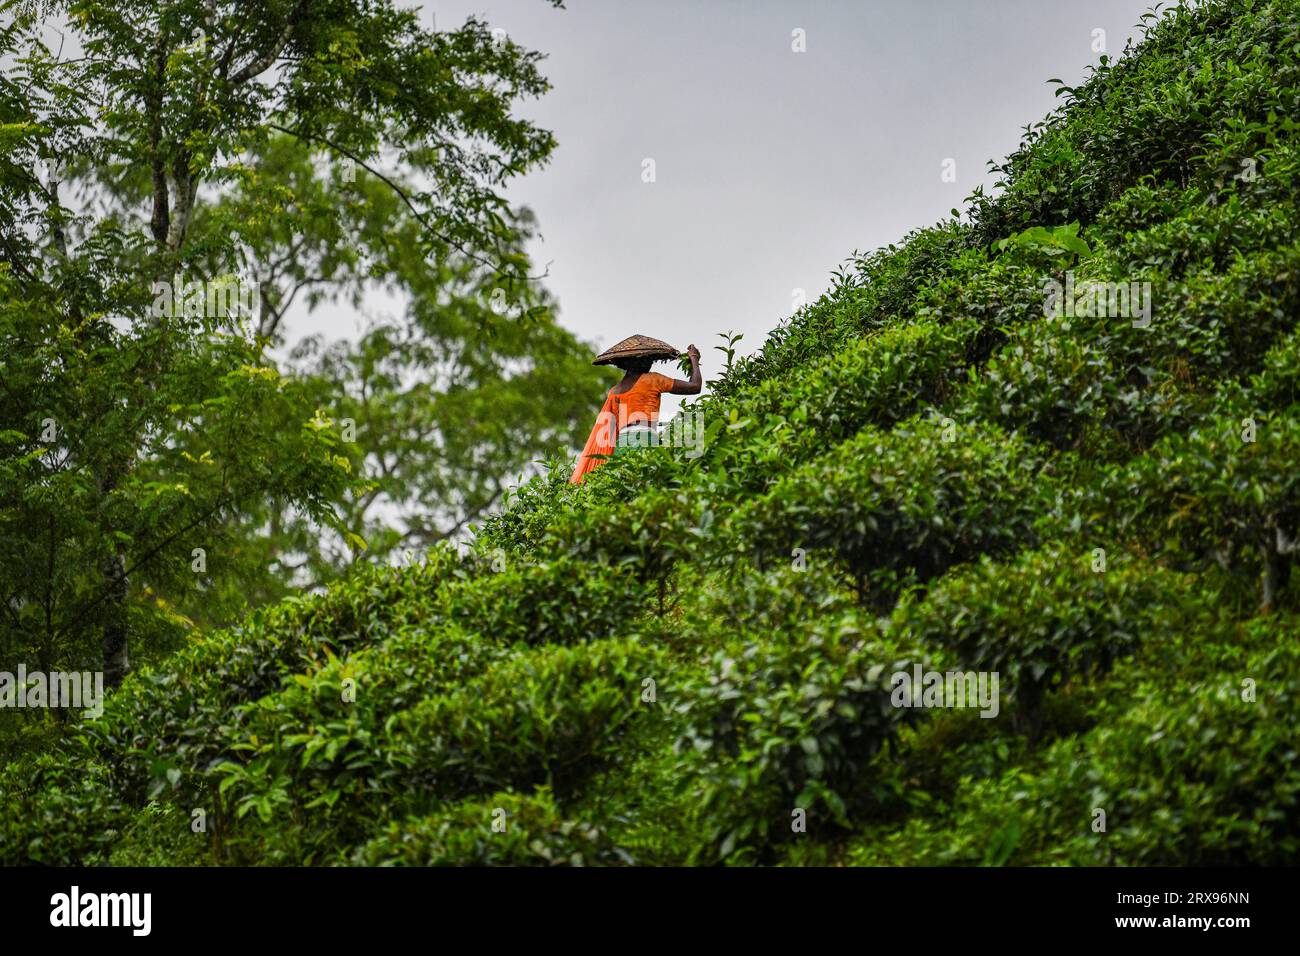 A Bangladeshi woman plucking tea leaves at a tea garden in Sylhet. Tea Plucking is a specialized skill. Two leaves and a bud need to be plucked in order to get the best taste and profitability. The calculation of daily wage is 170tk(1.60$) for plucking at least 22-23 kg leaves per day for a worker. The area of Sylhet has over 150 gardens including three of the largest tea gardens in the world both in area and production. Nearly 300,000 workers are employed on the tea estates of which over 75% are women but they are passing their lives as a slave. Stock Photo